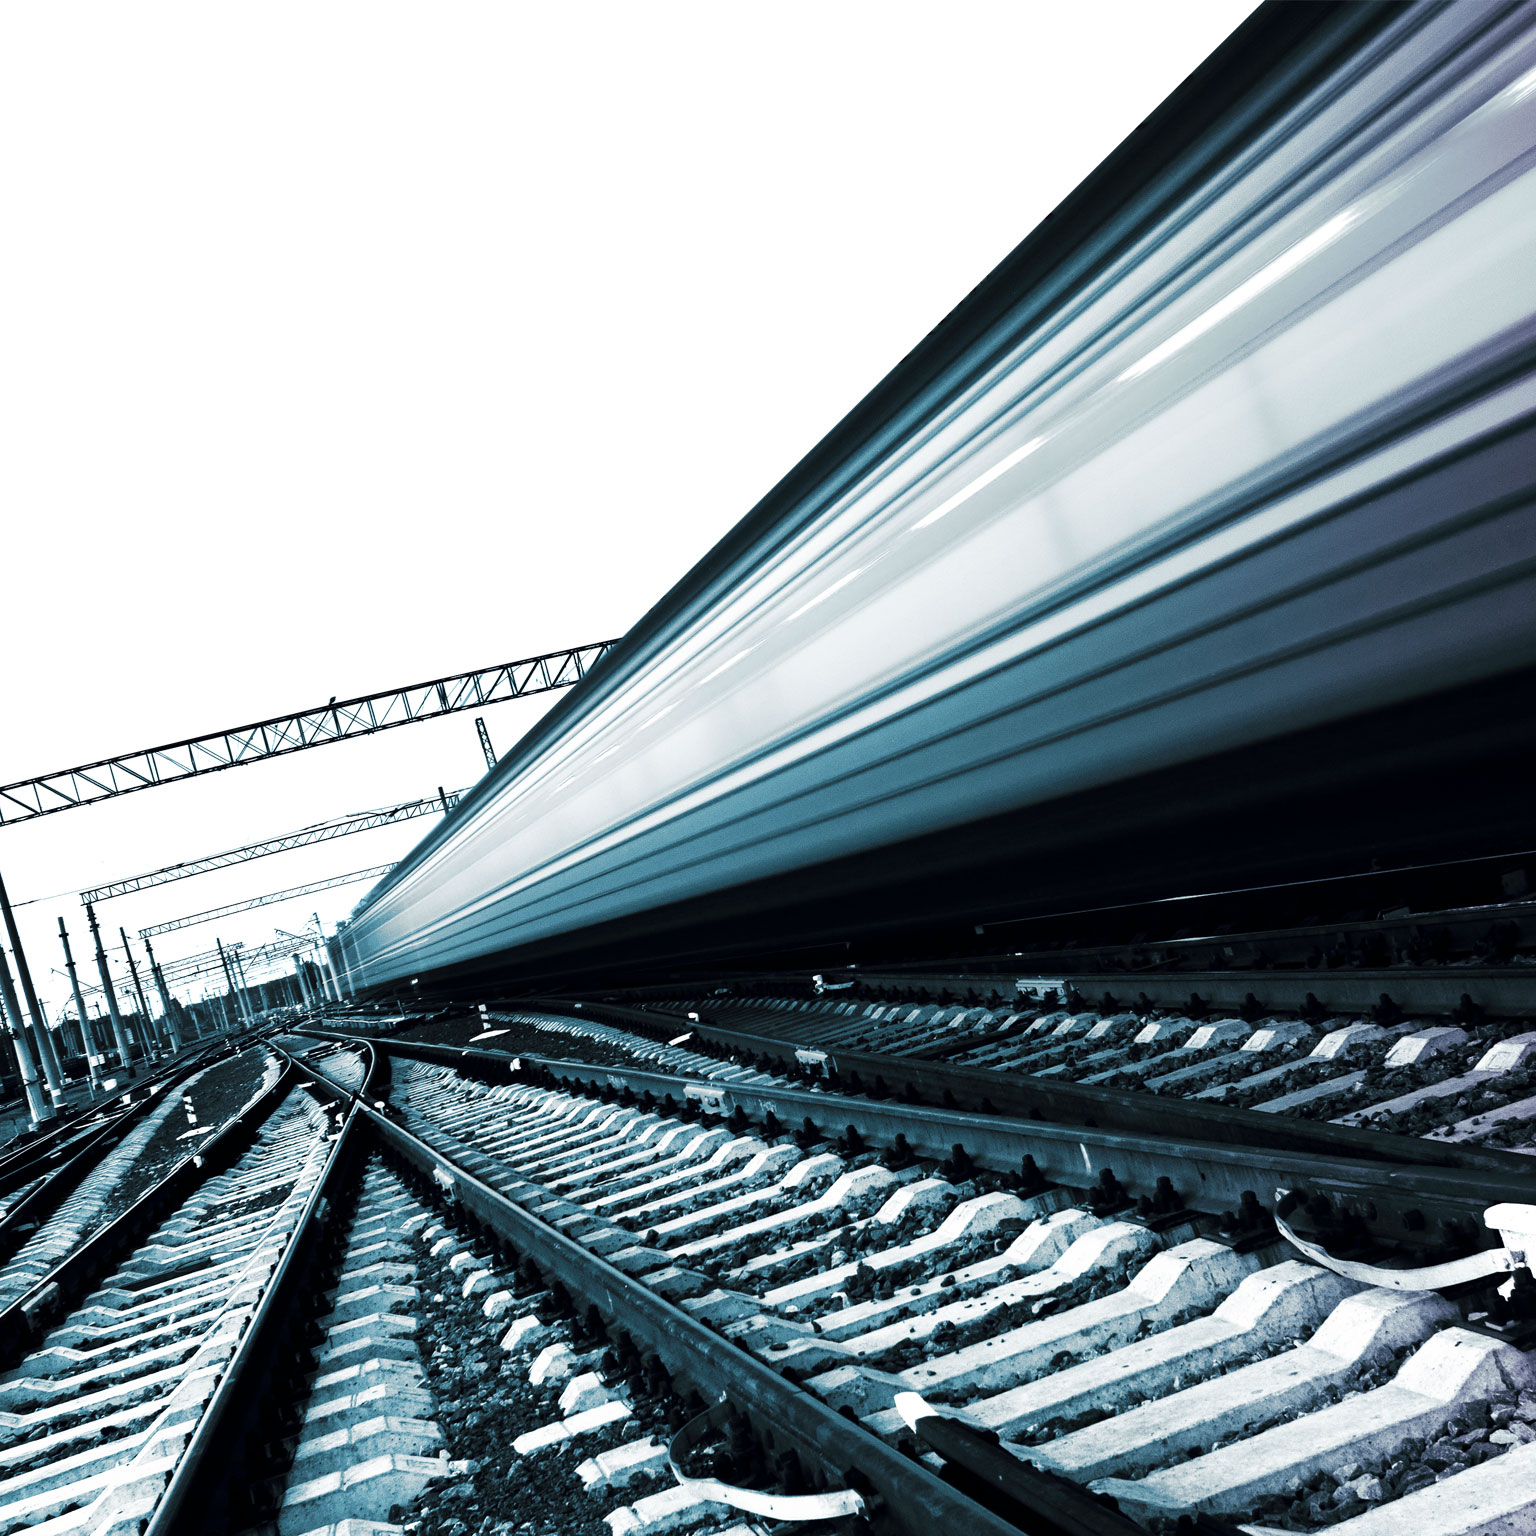 Rail Europe Presents Its Strategy as Leading Global Brand for European  Train Travel